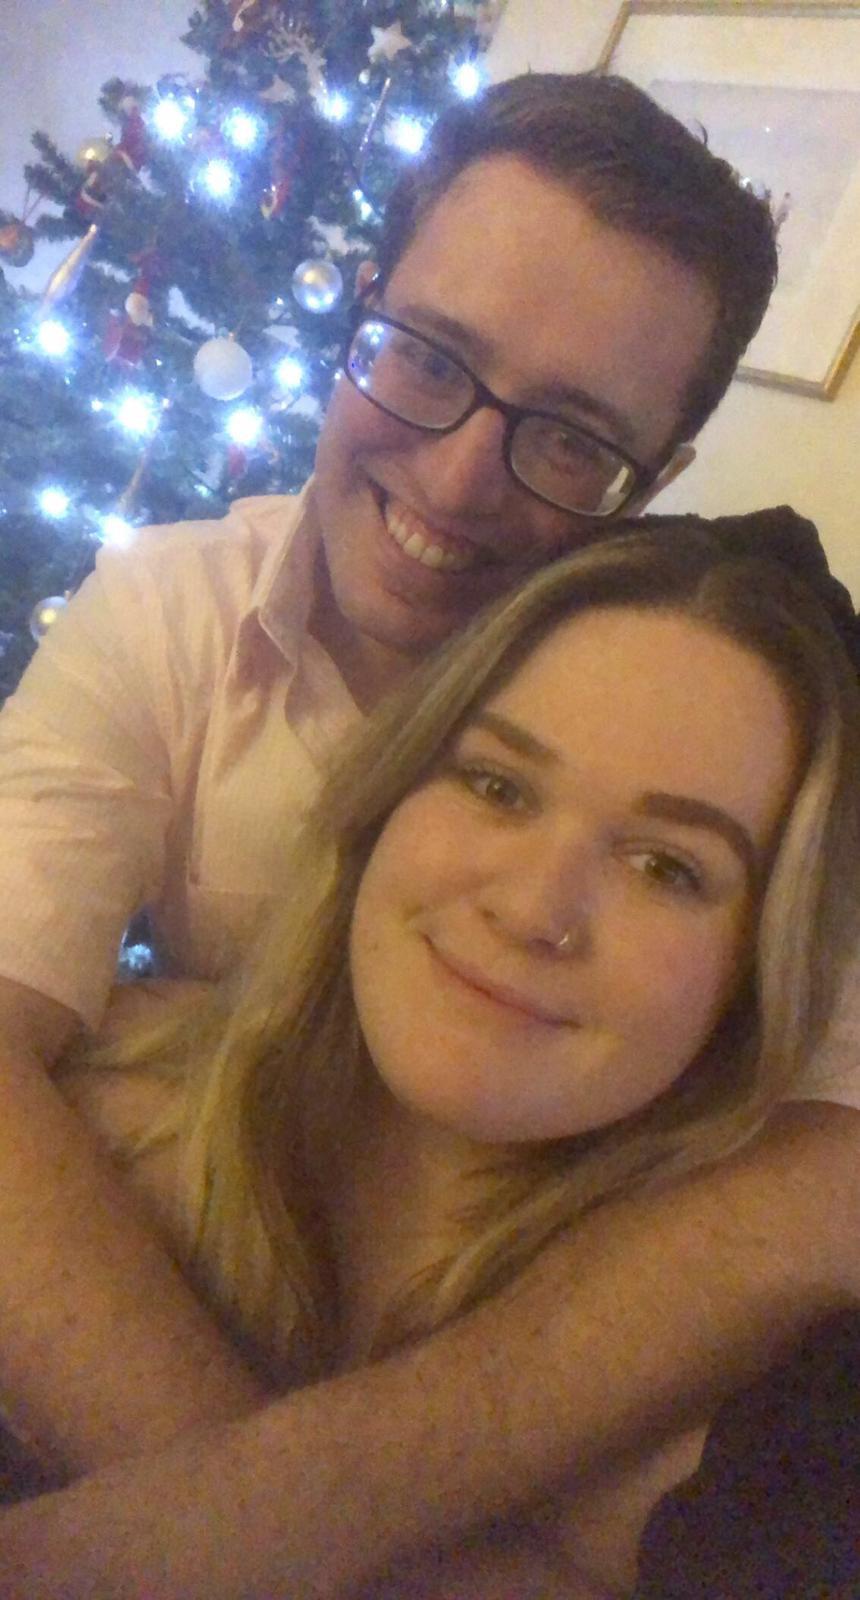 Merry Christmas from an American  boy and British lady in England!